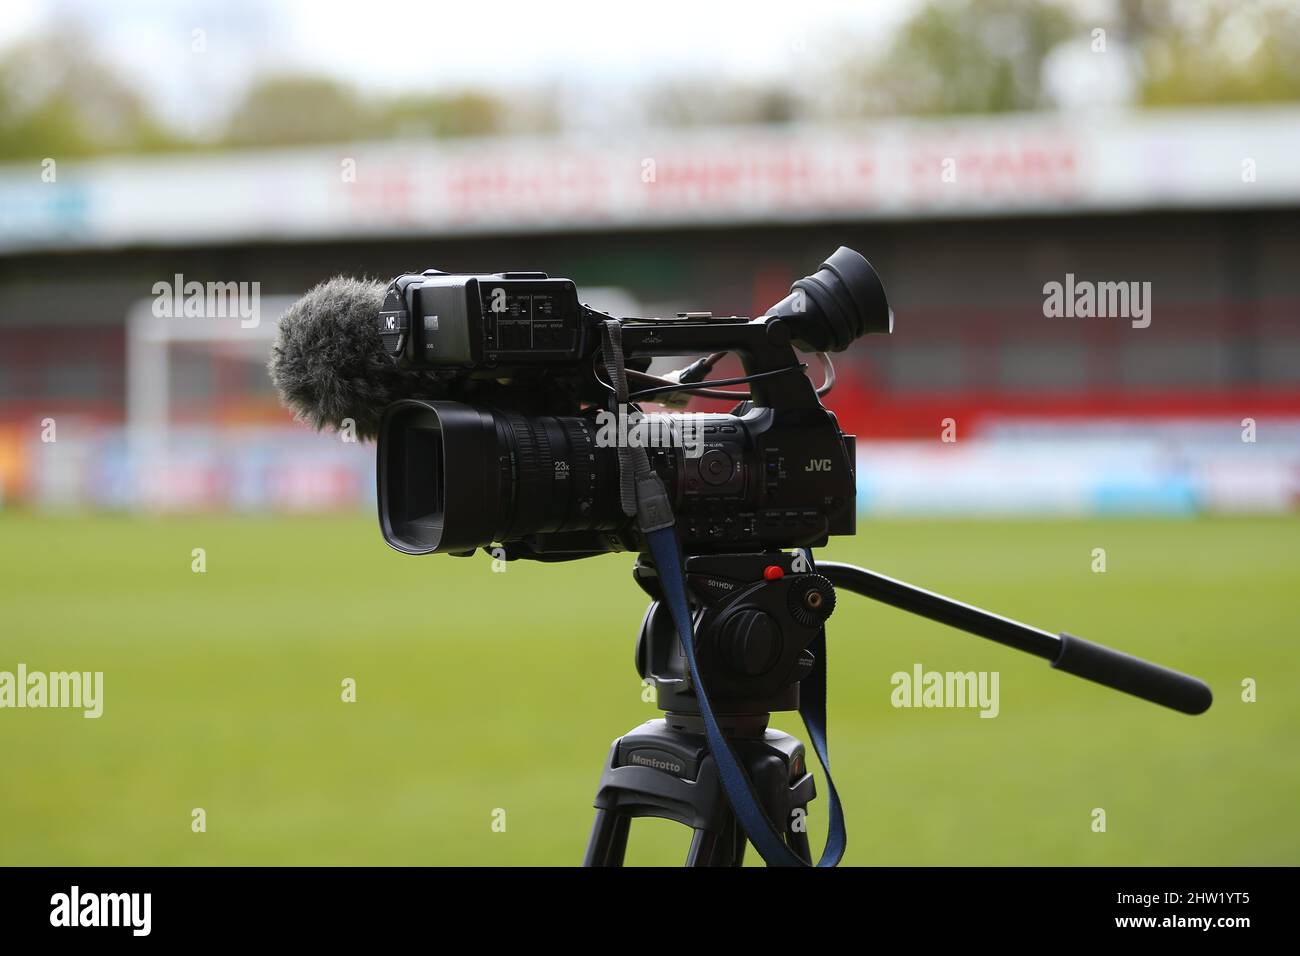 Jvc video camera hi-res stock photography and images - Alamy